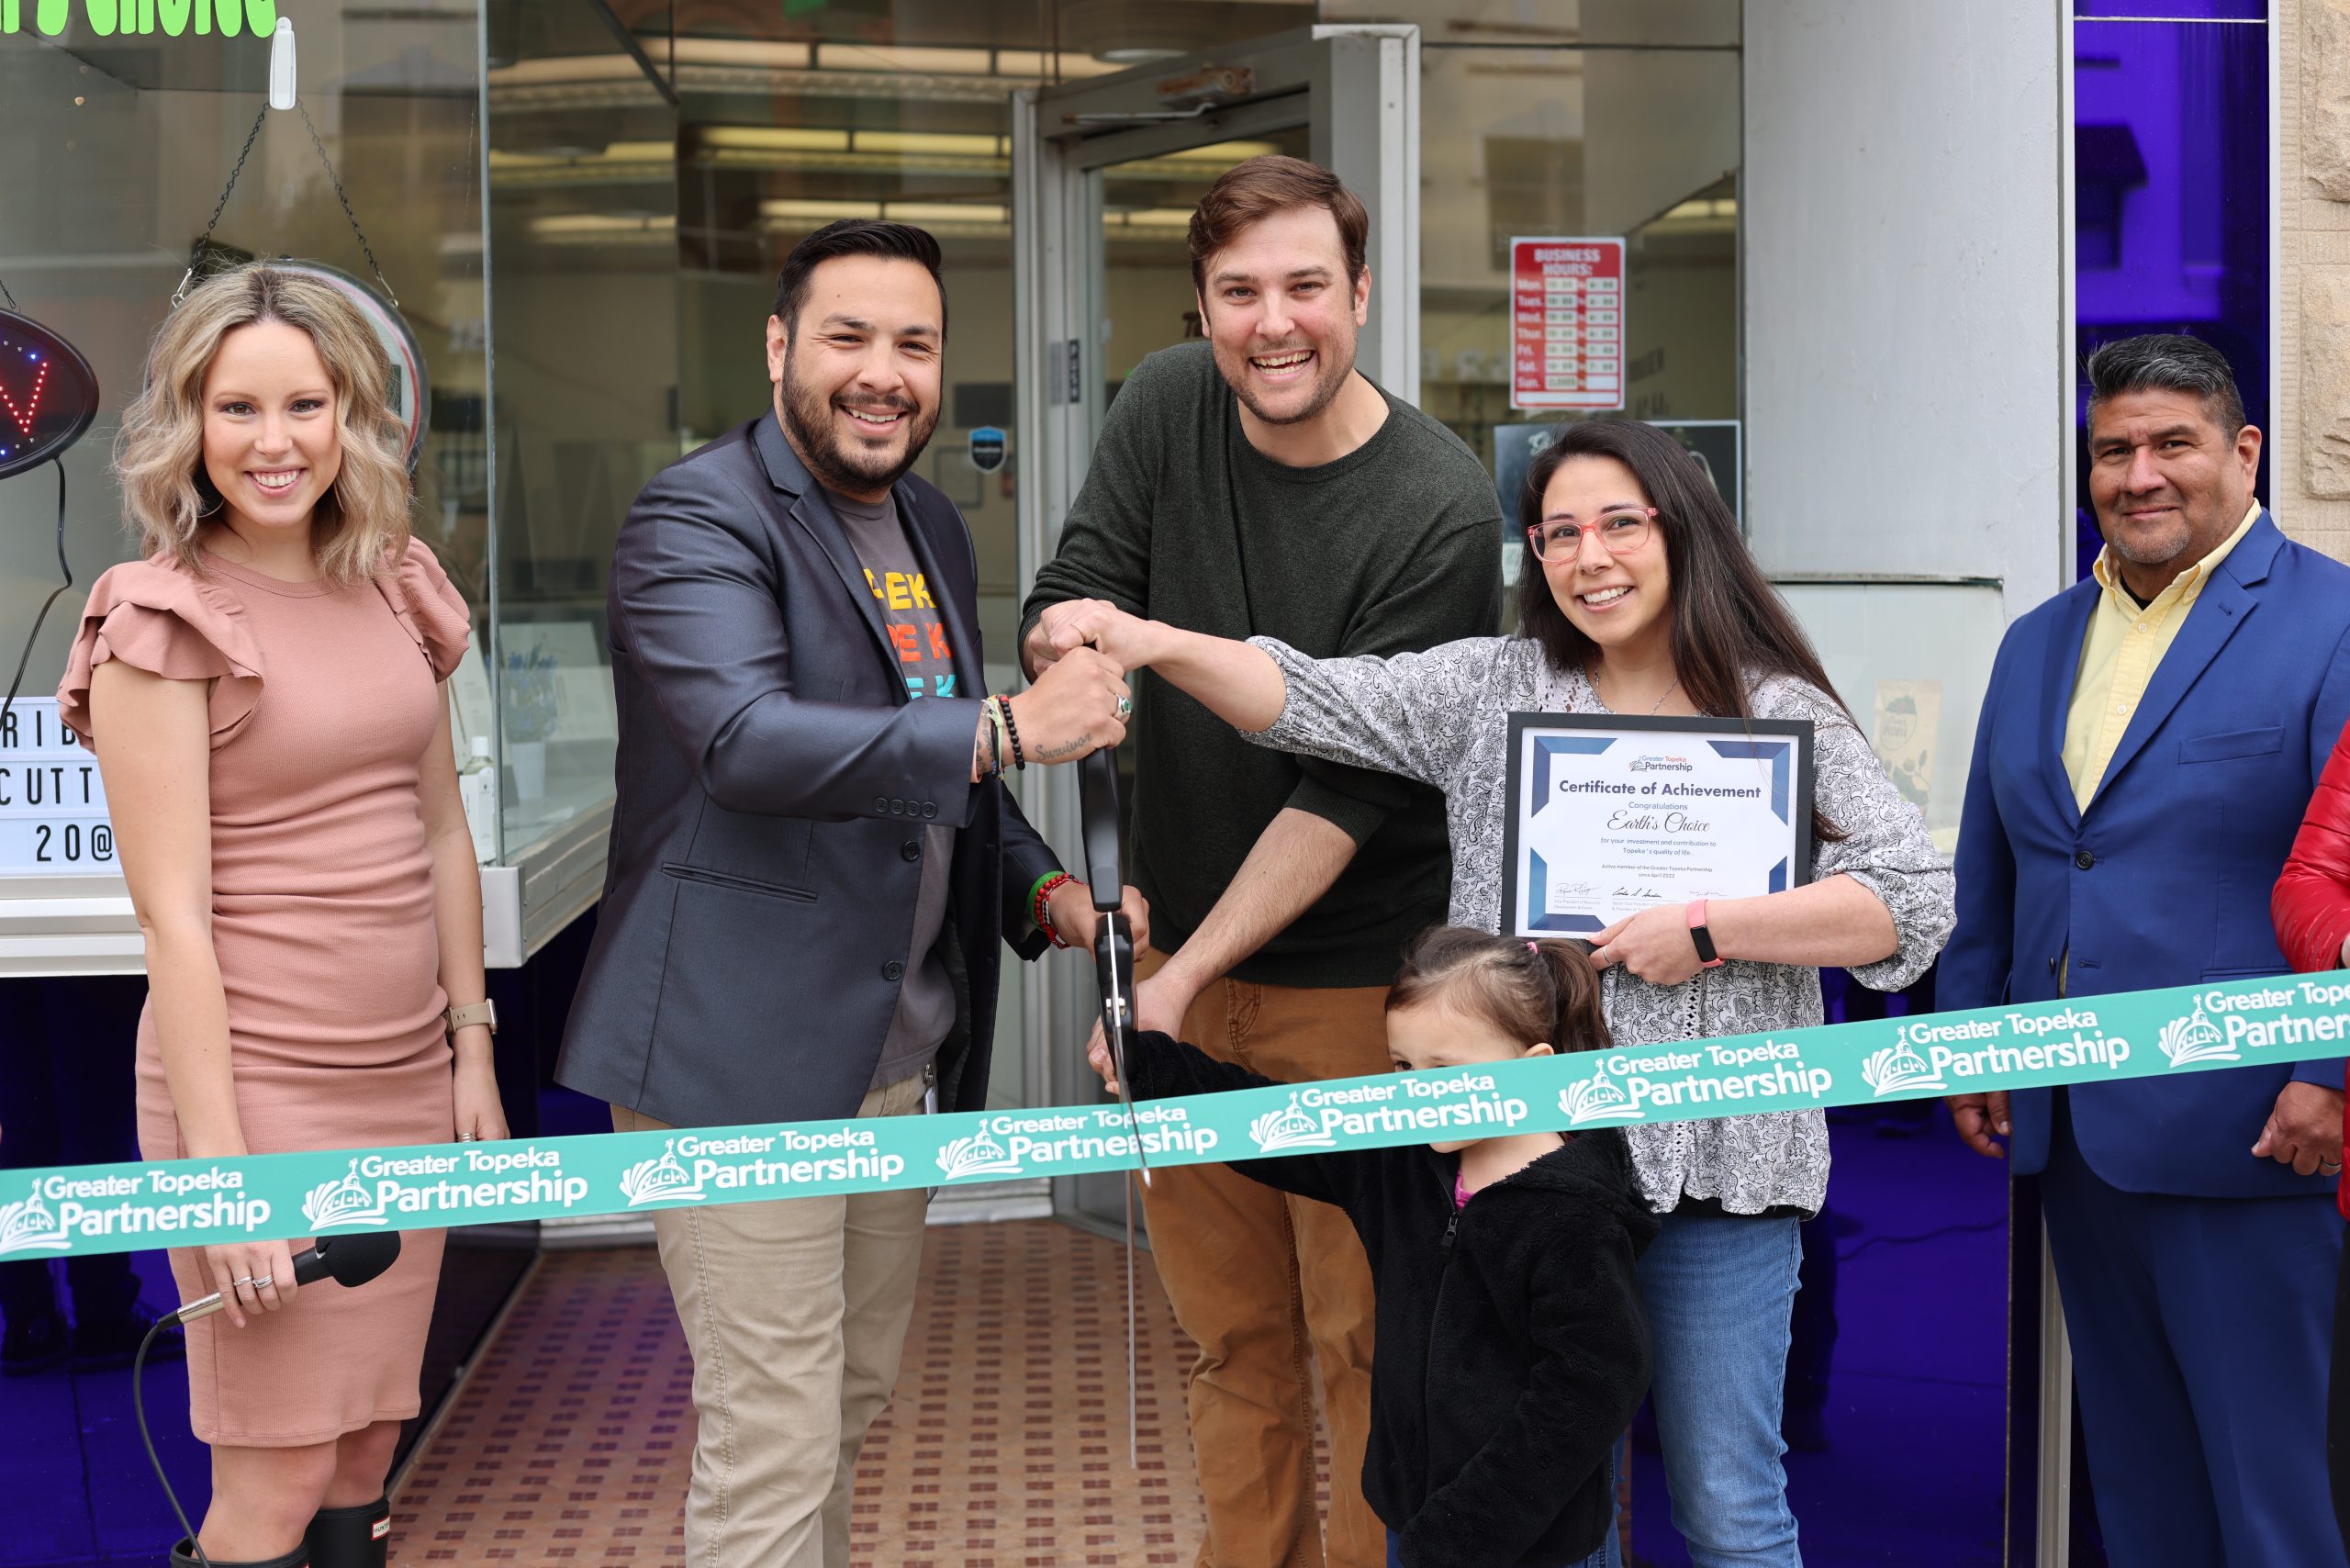 We celebrated the opening of Earth’s Choice in Downtown Topeka with a ribbon cutting! Earth’s Choice is a CBD store and some of their products include, homemade soaps, honey, sleep and muscle ointments, candles, CBD flour and bath bombs.